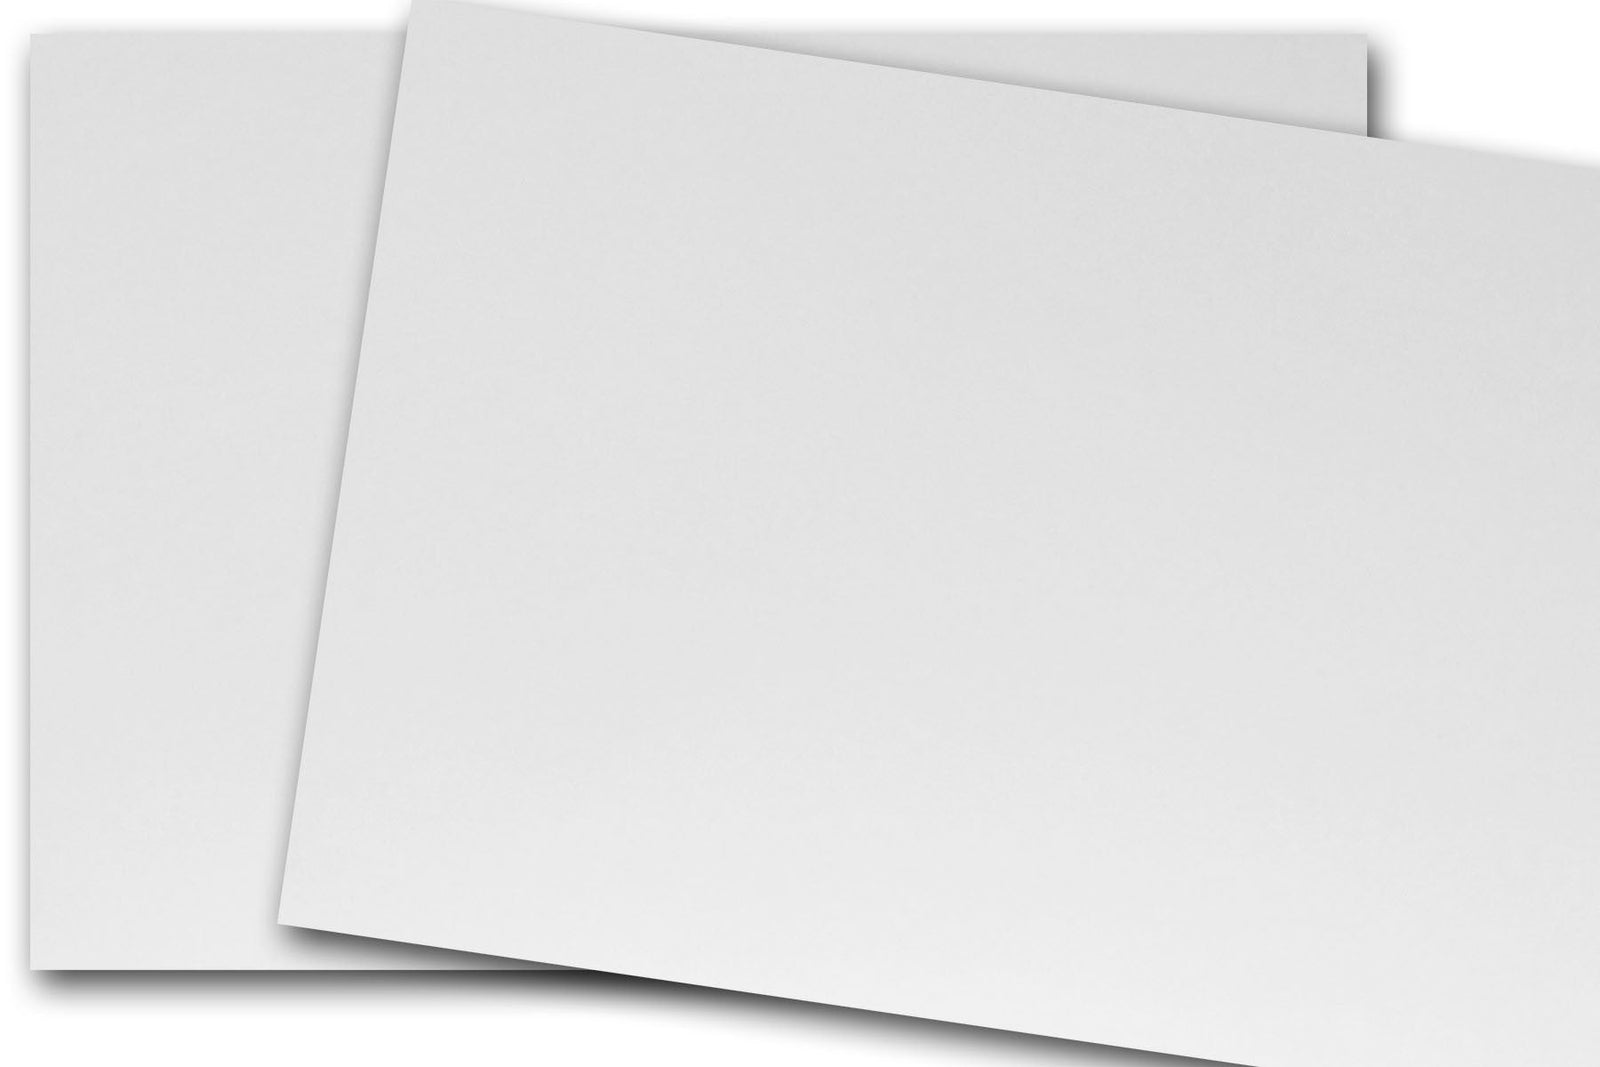 Classic CREST SOLAR WHITE Card Stock for Copic marker enthusiasts -  CutCardStock